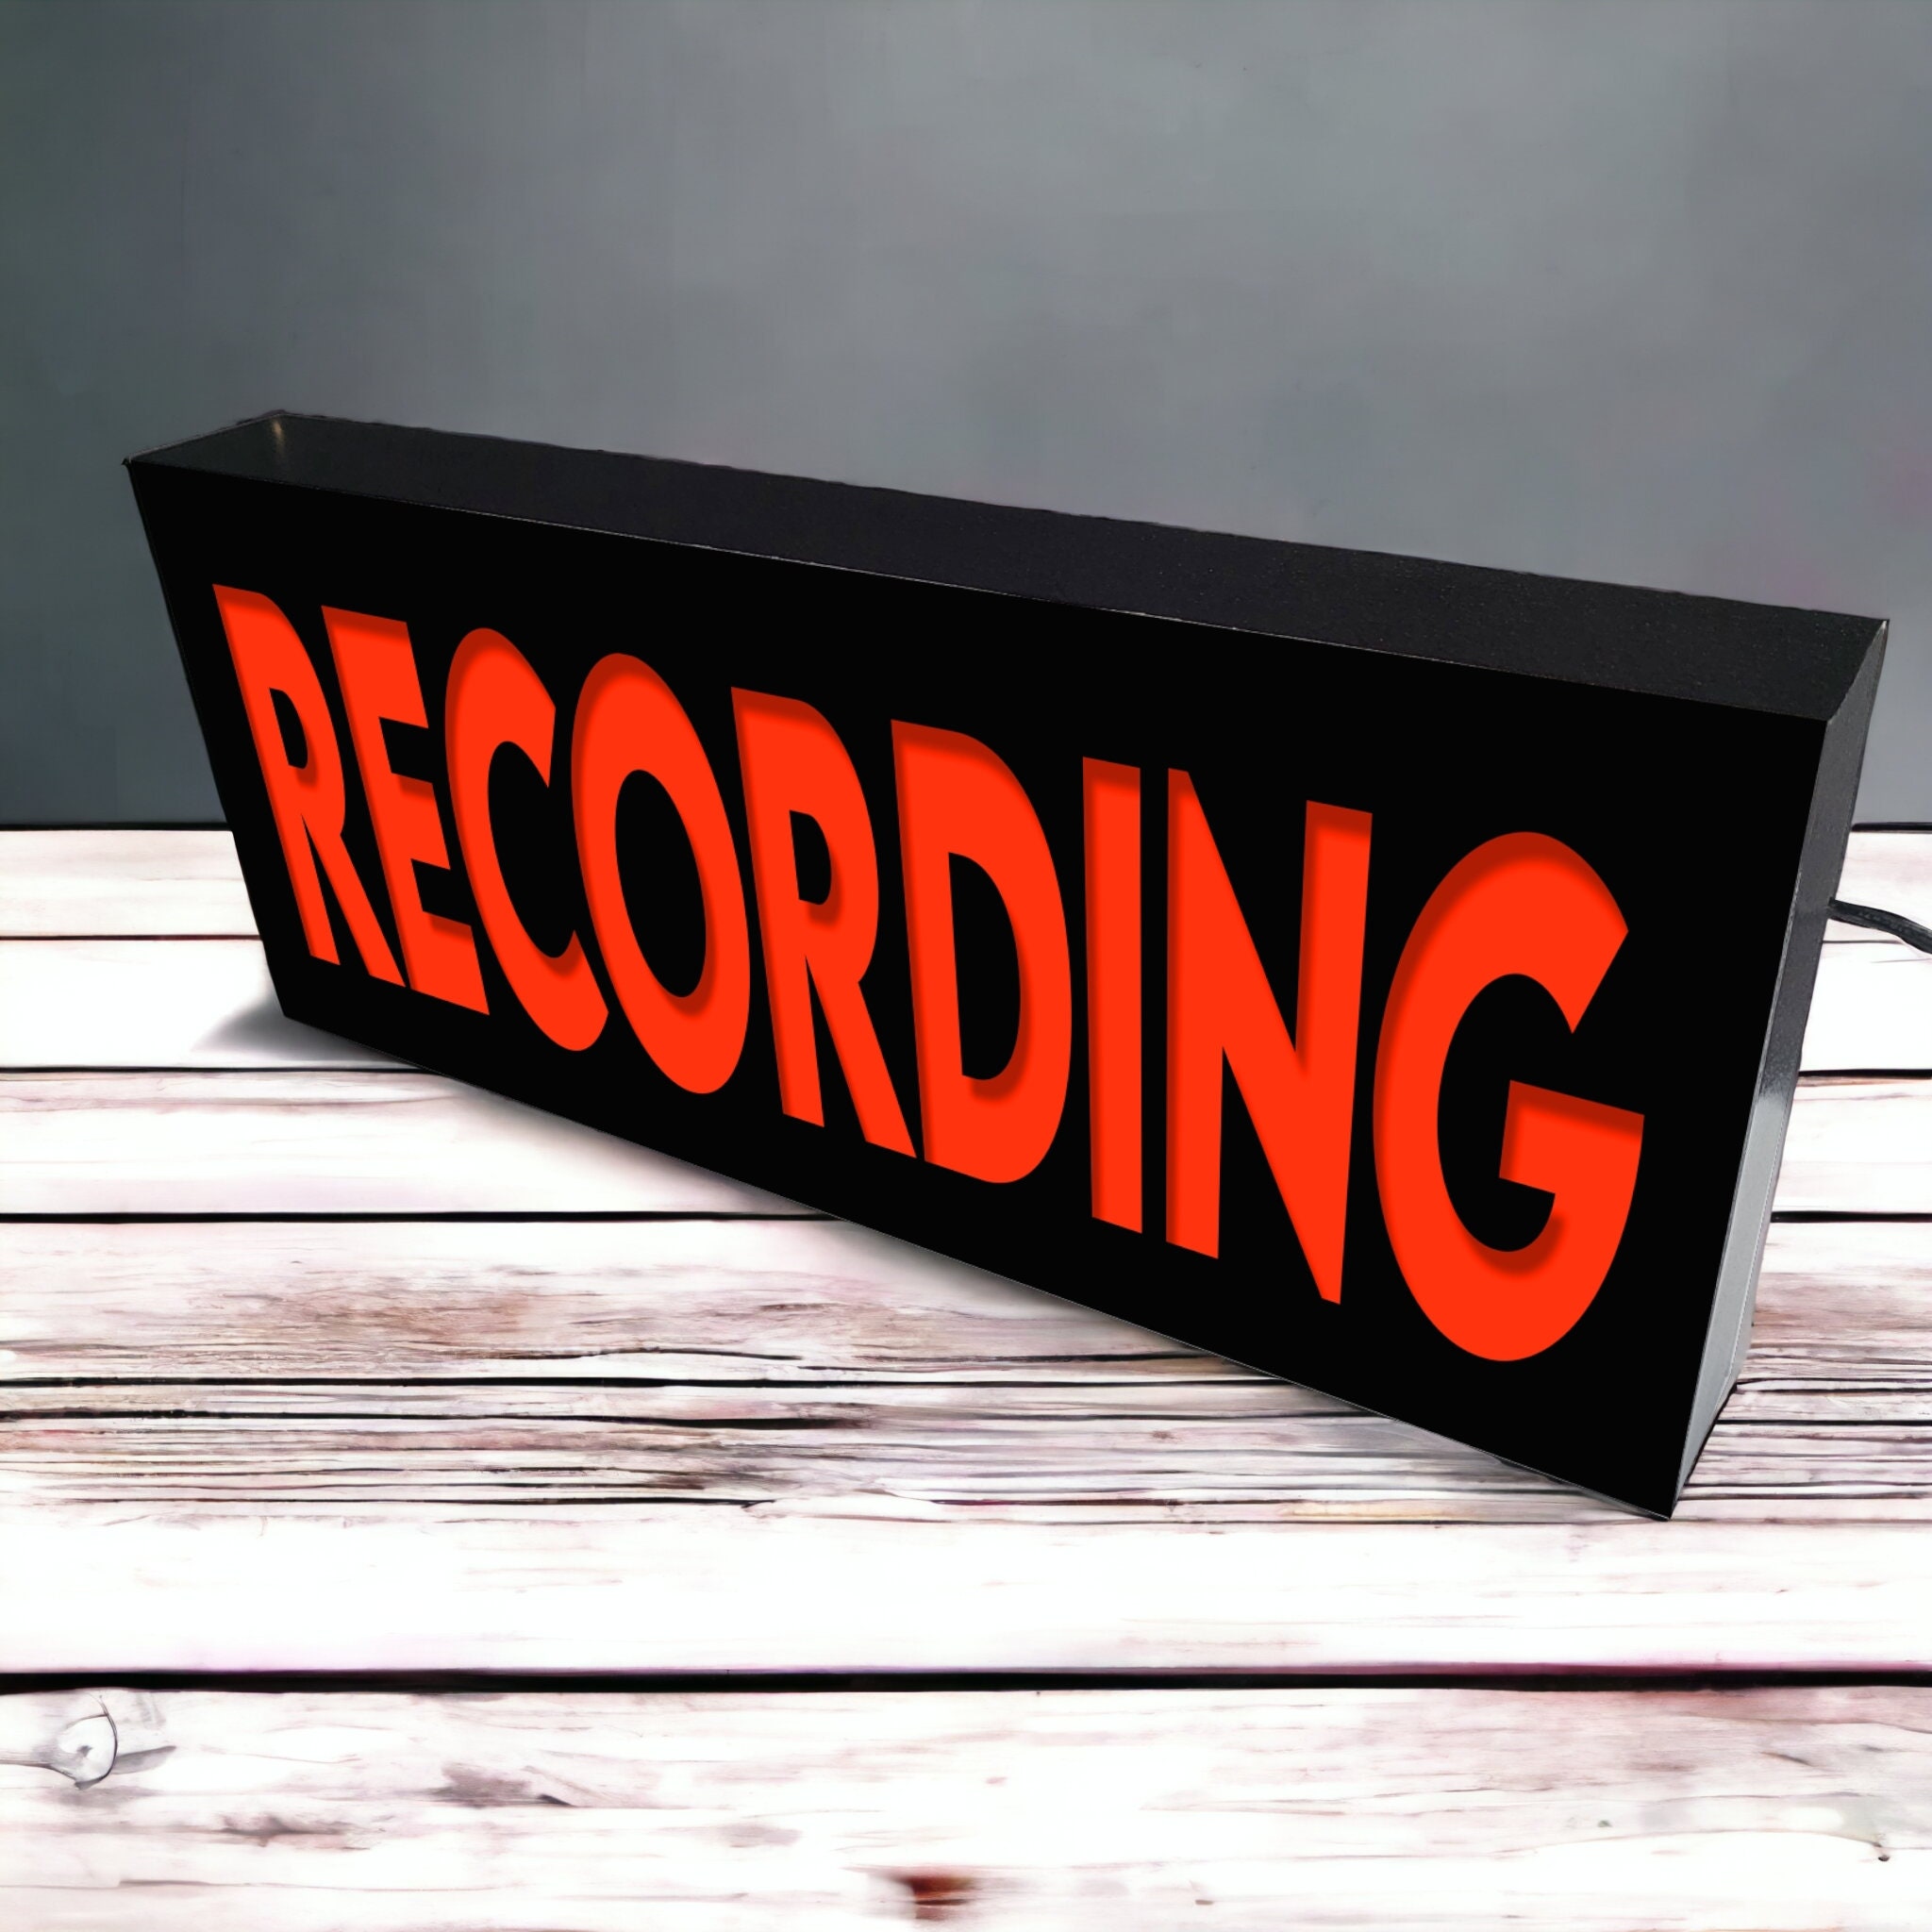 ON AIR SIGN LED LIGHT Recording Sign Studio Warning Signfor (Studio/Home  Studio/Company/Desk or Wall Decor). Simple and Easy ON/Off Switch Button.Up